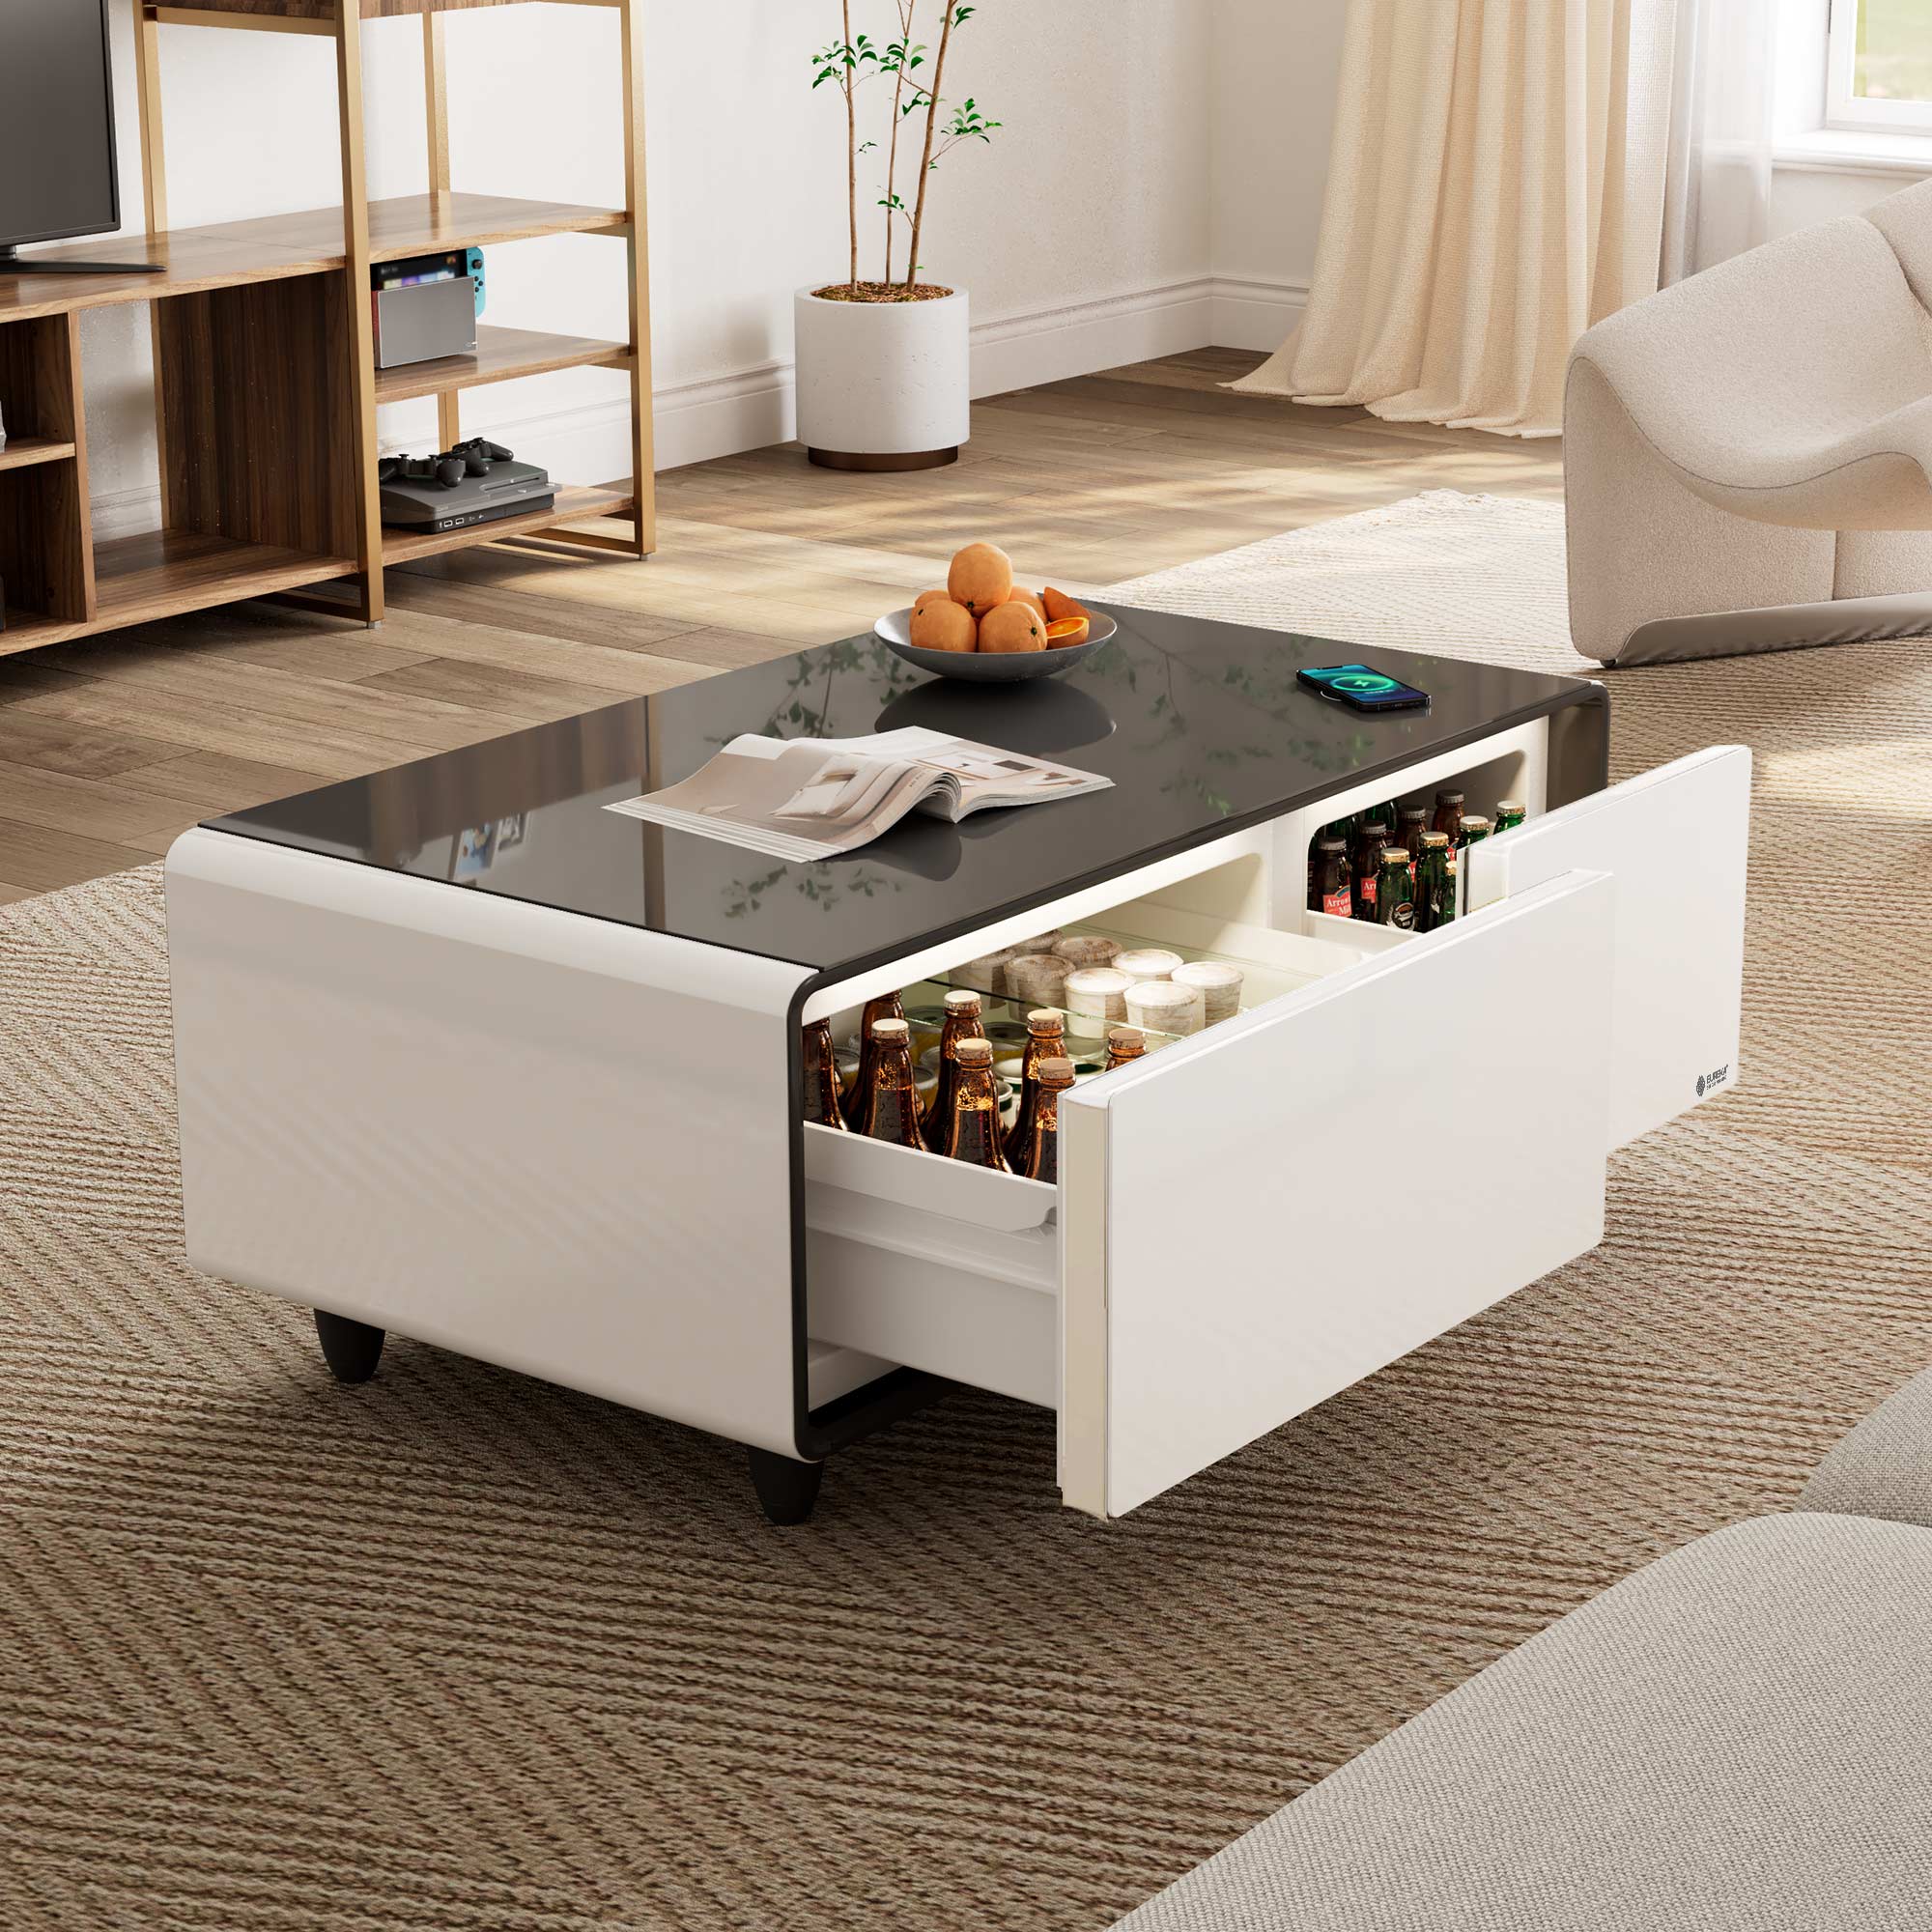 Eureka smart coffee table with fridge charging station for living room